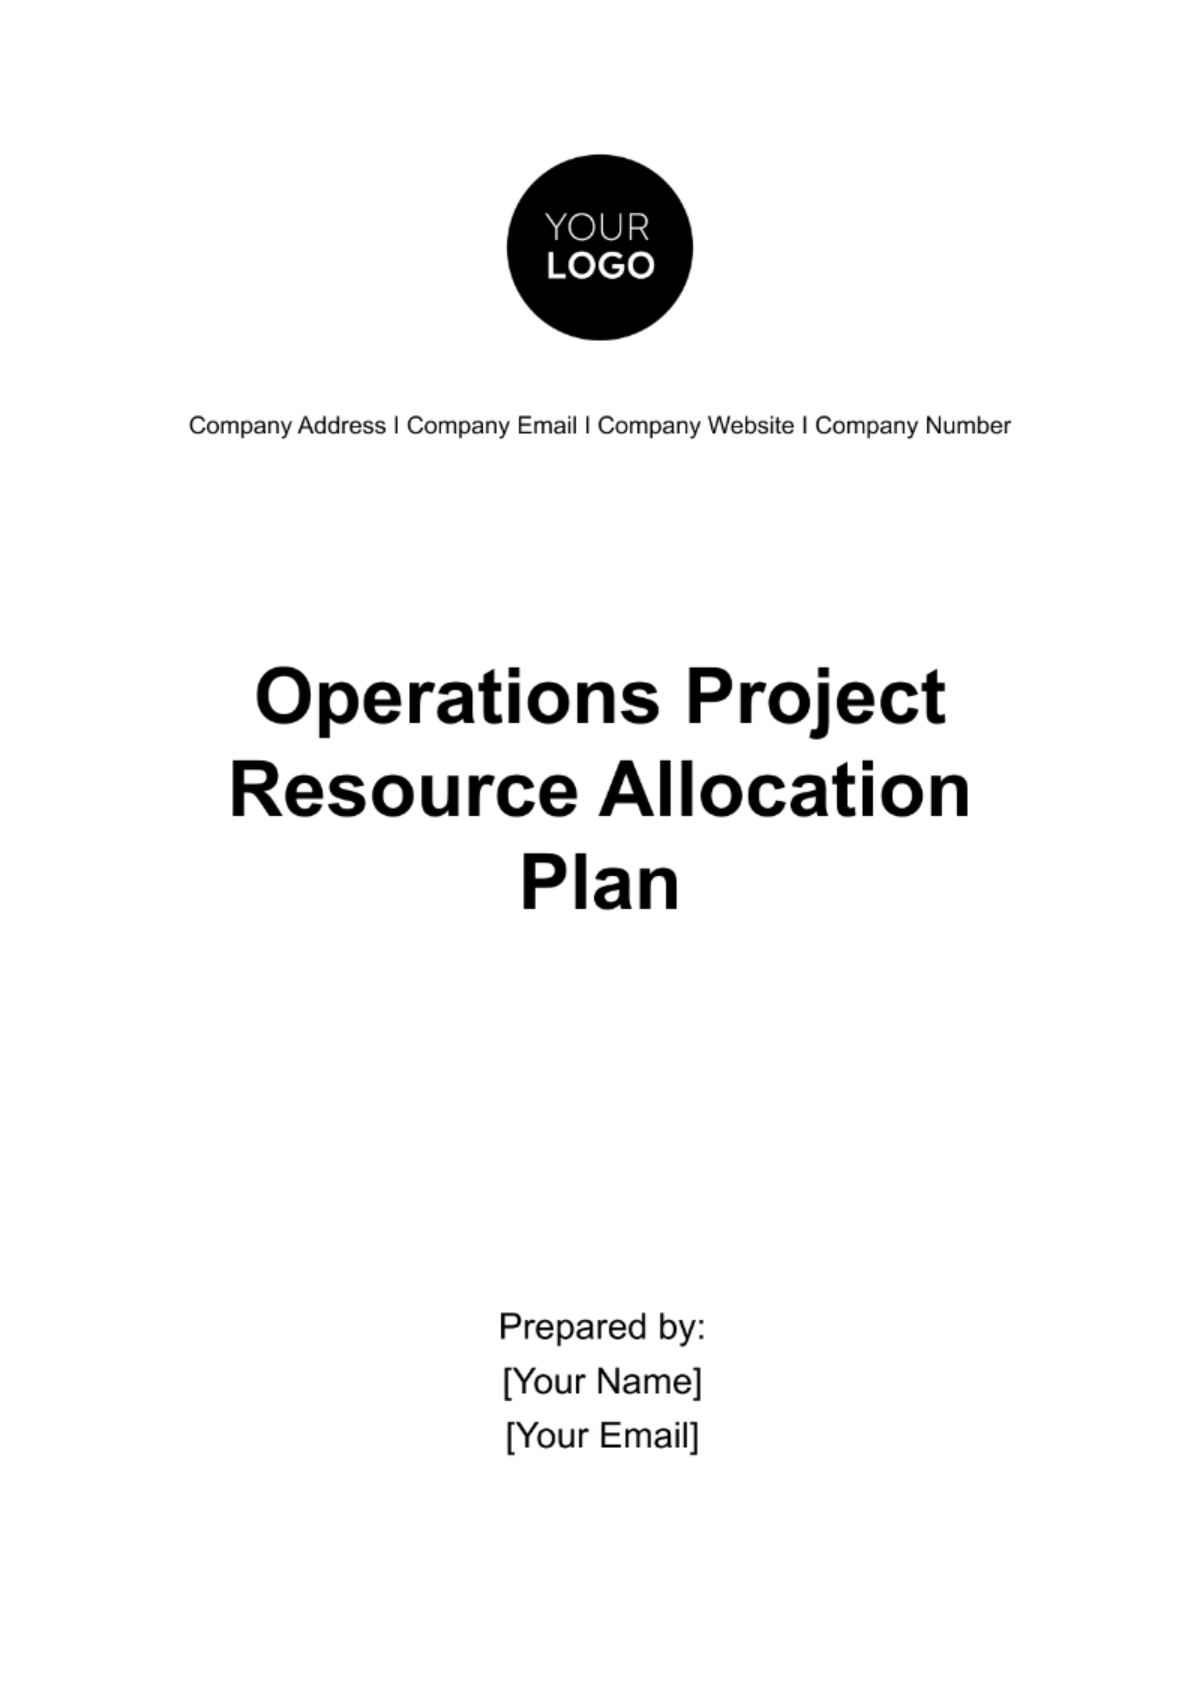 Operations Project Resource Allocation Plan Template